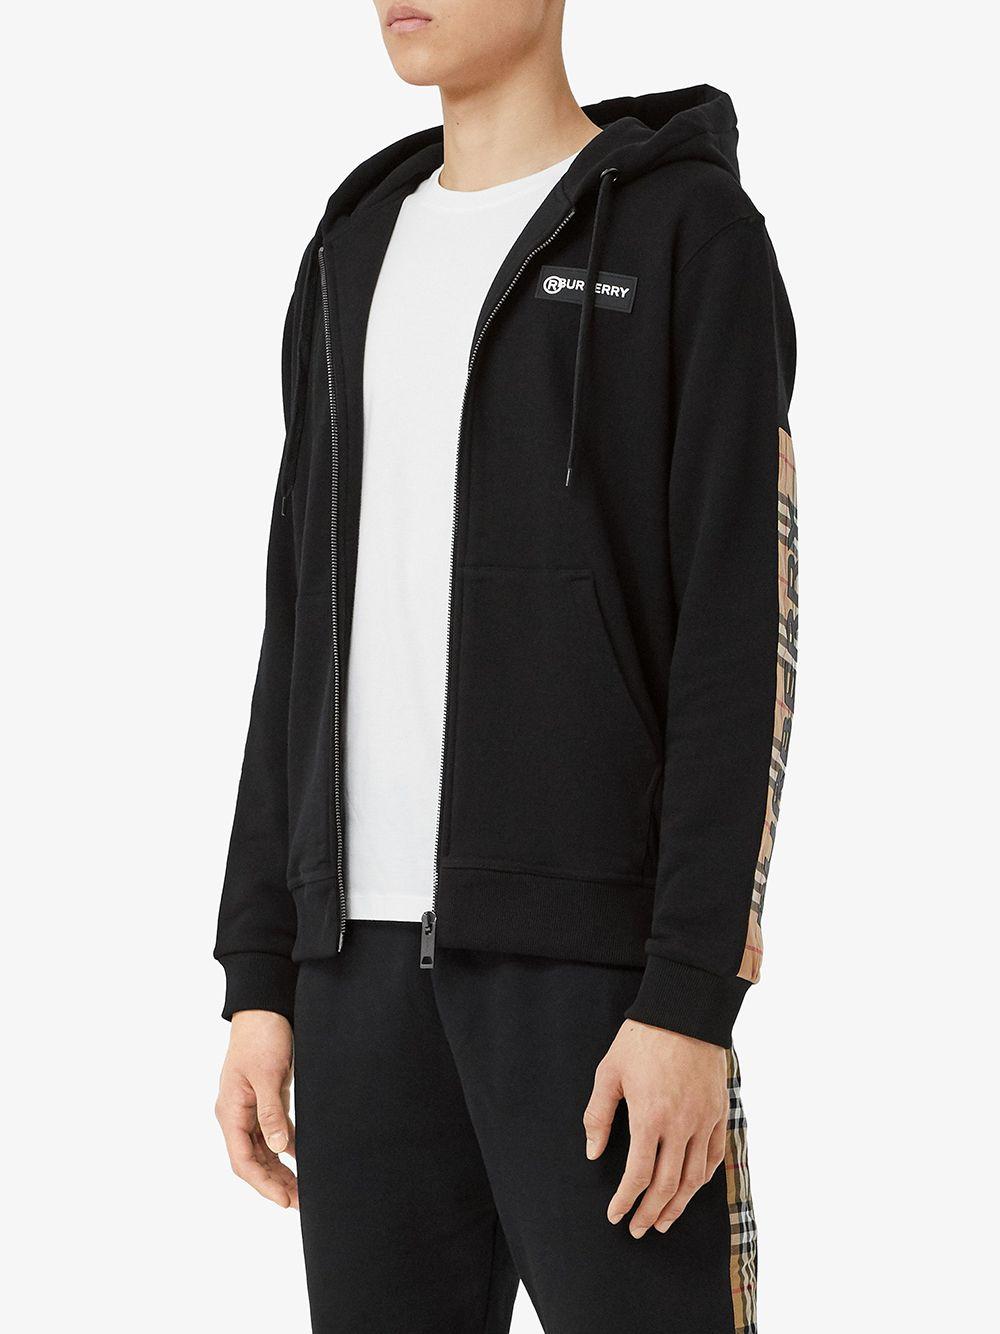 Burberry Vintage Check Zipped Hoodie in Black for Men - Lyst